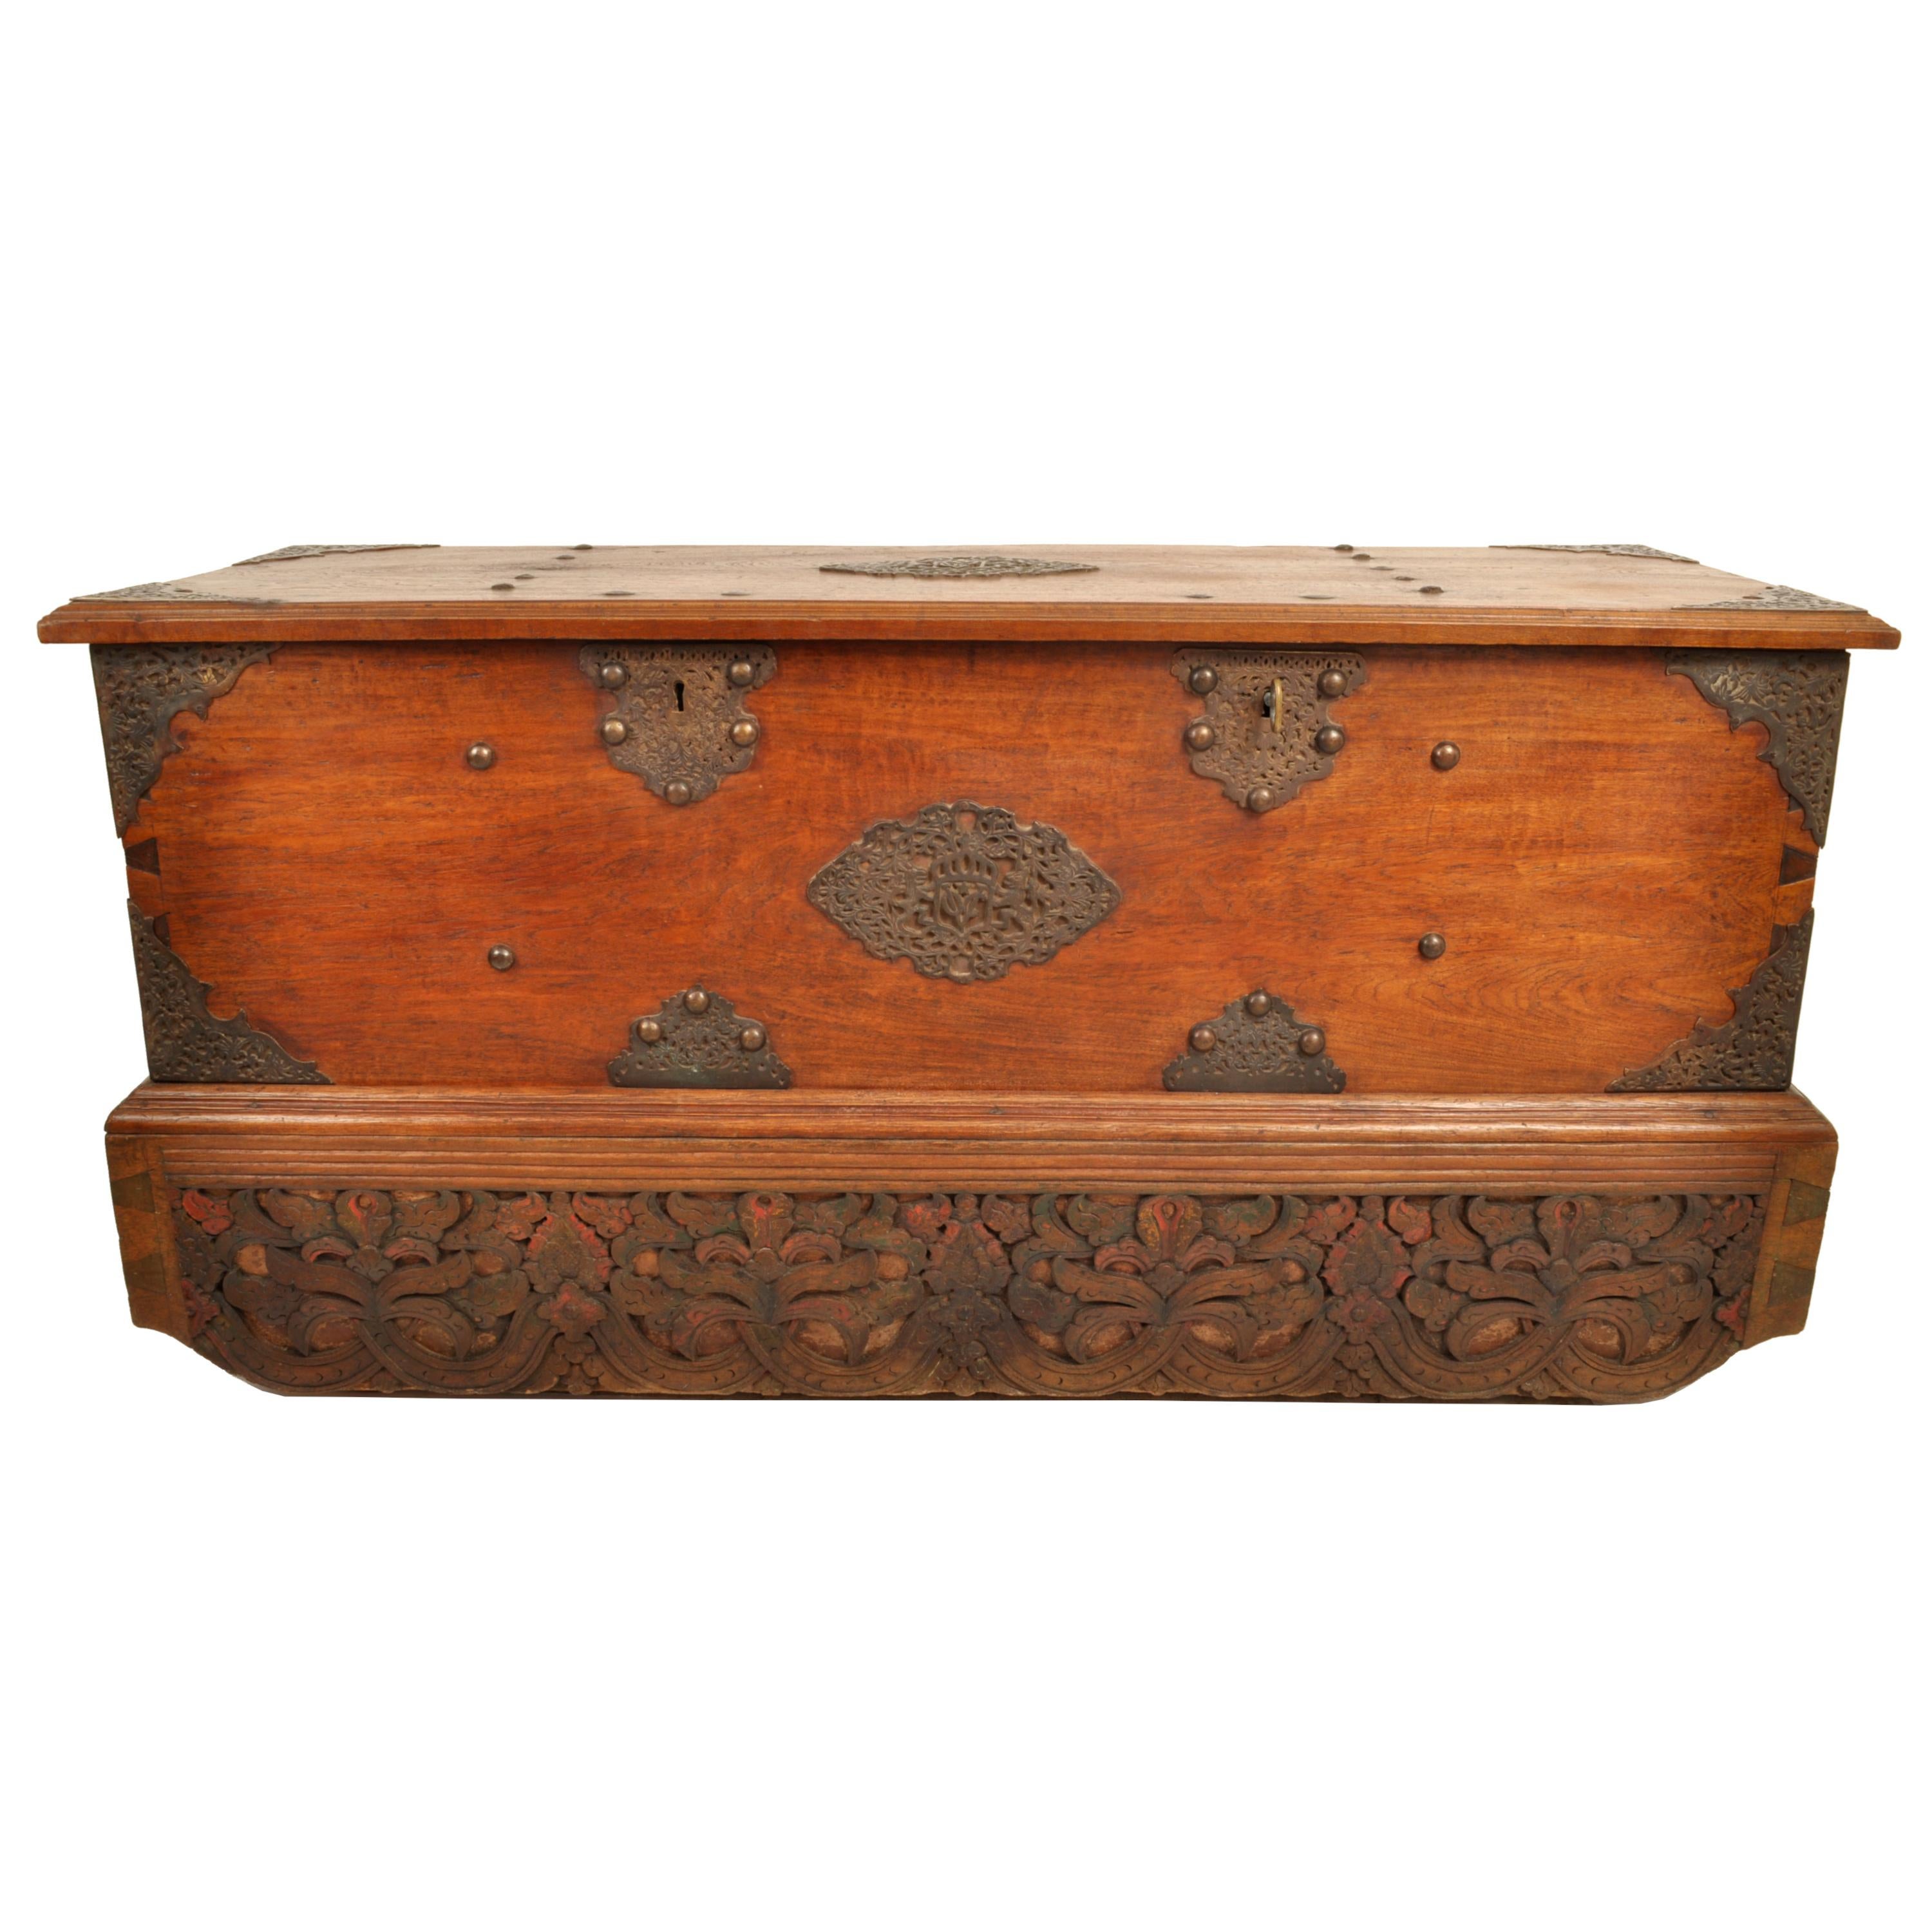 A very impressive, monumental antique 18th century VOC (Vereenigde Oost-Indische Compagnie) Dutch colonial carved teak & brass mounted Governor's chest, circa 1780.
This fine Dutch colonial chest would have been owned by one of the VOC's island